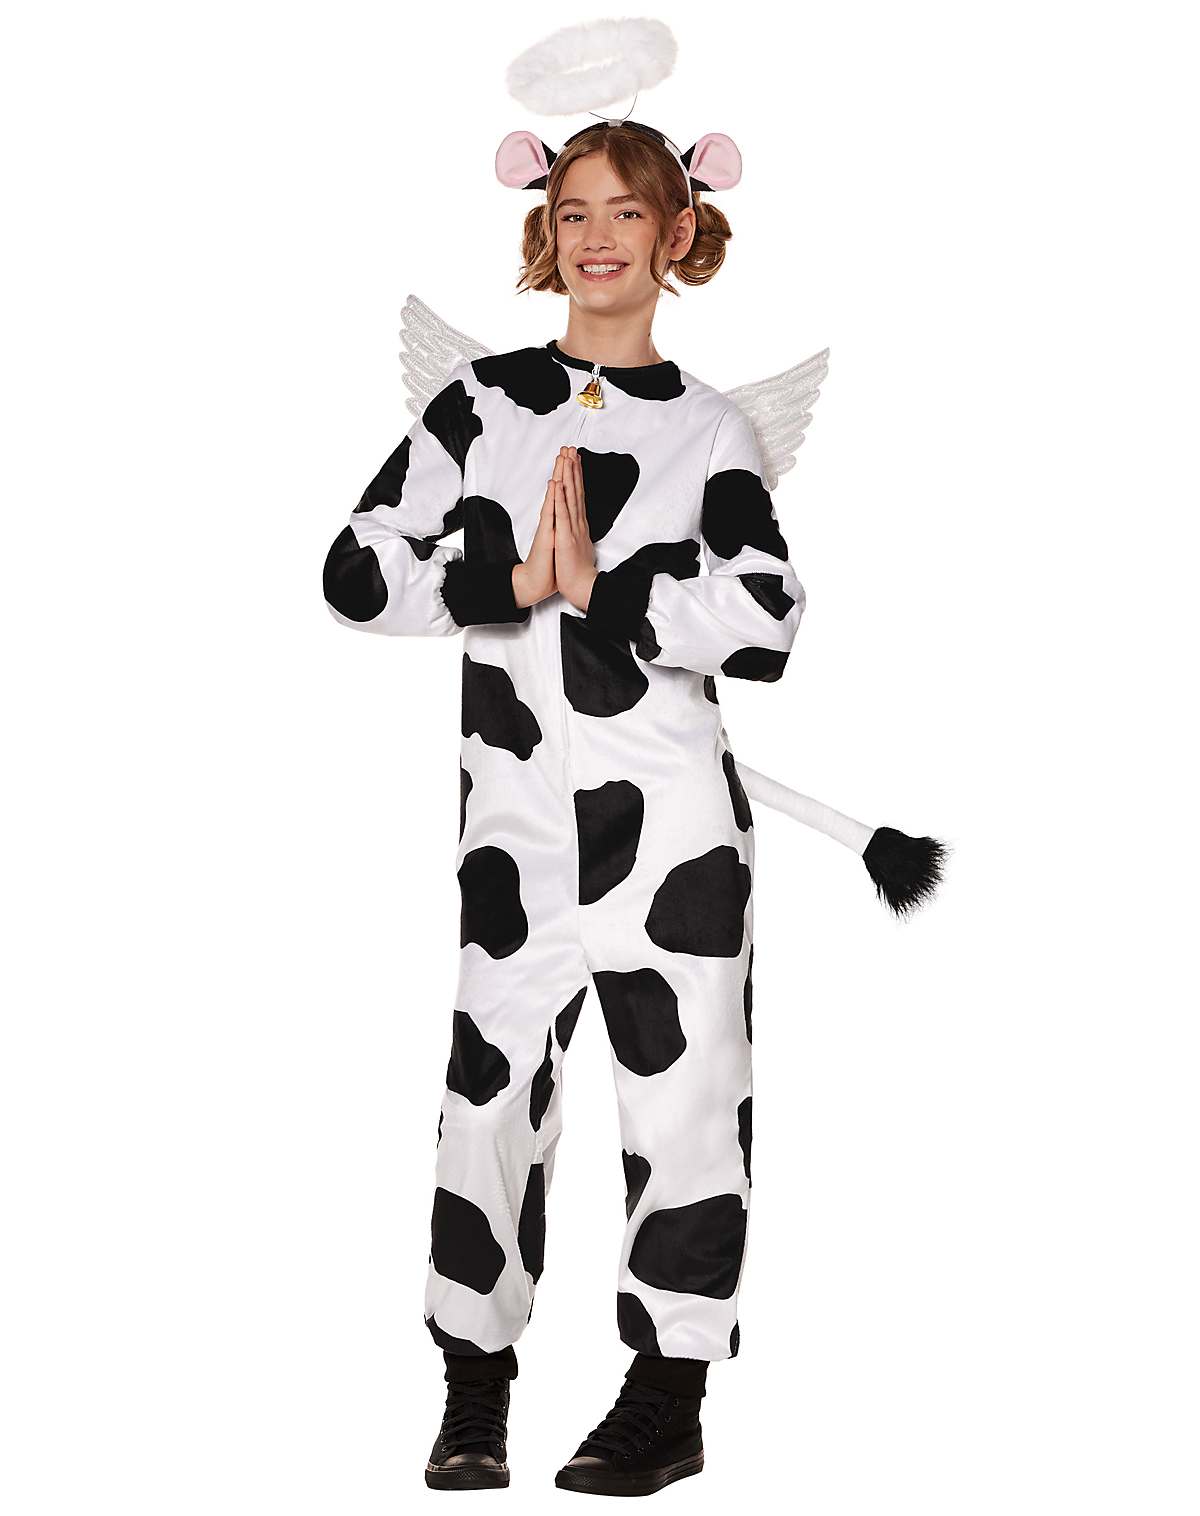 Kids Holy Cow Union Suit Costume